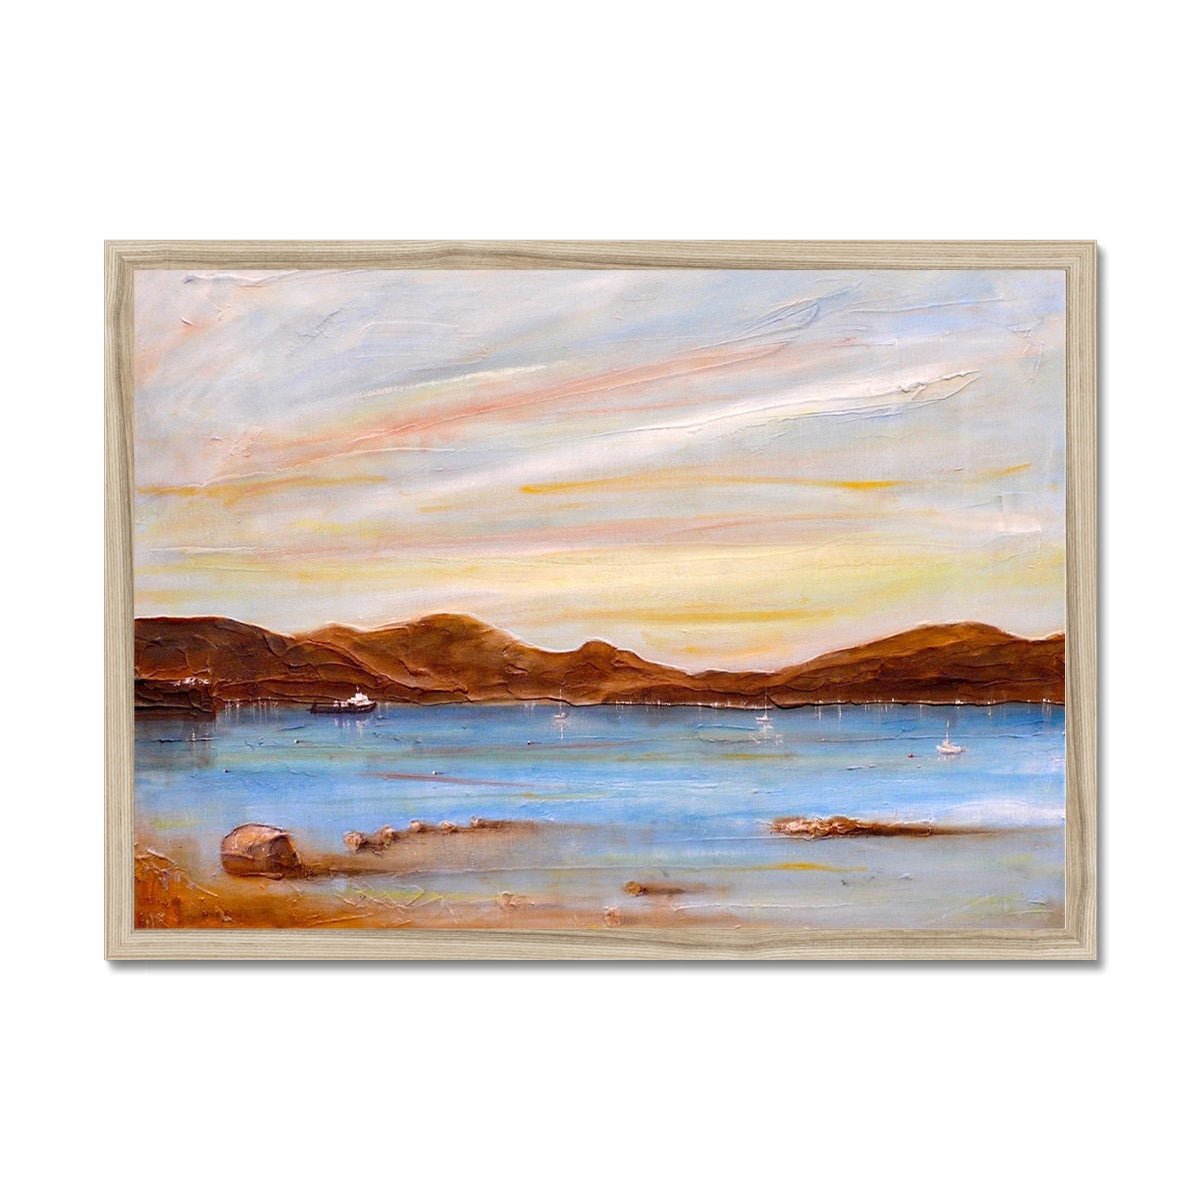 The Last Ferry To Dunoon Painting | Framed Prints From Scotland-Framed Prints-River Clyde Art Gallery-A2 Landscape-Natural Frame-Paintings, Prints, Homeware, Art Gifts From Scotland By Scottish Artist Kevin Hunter